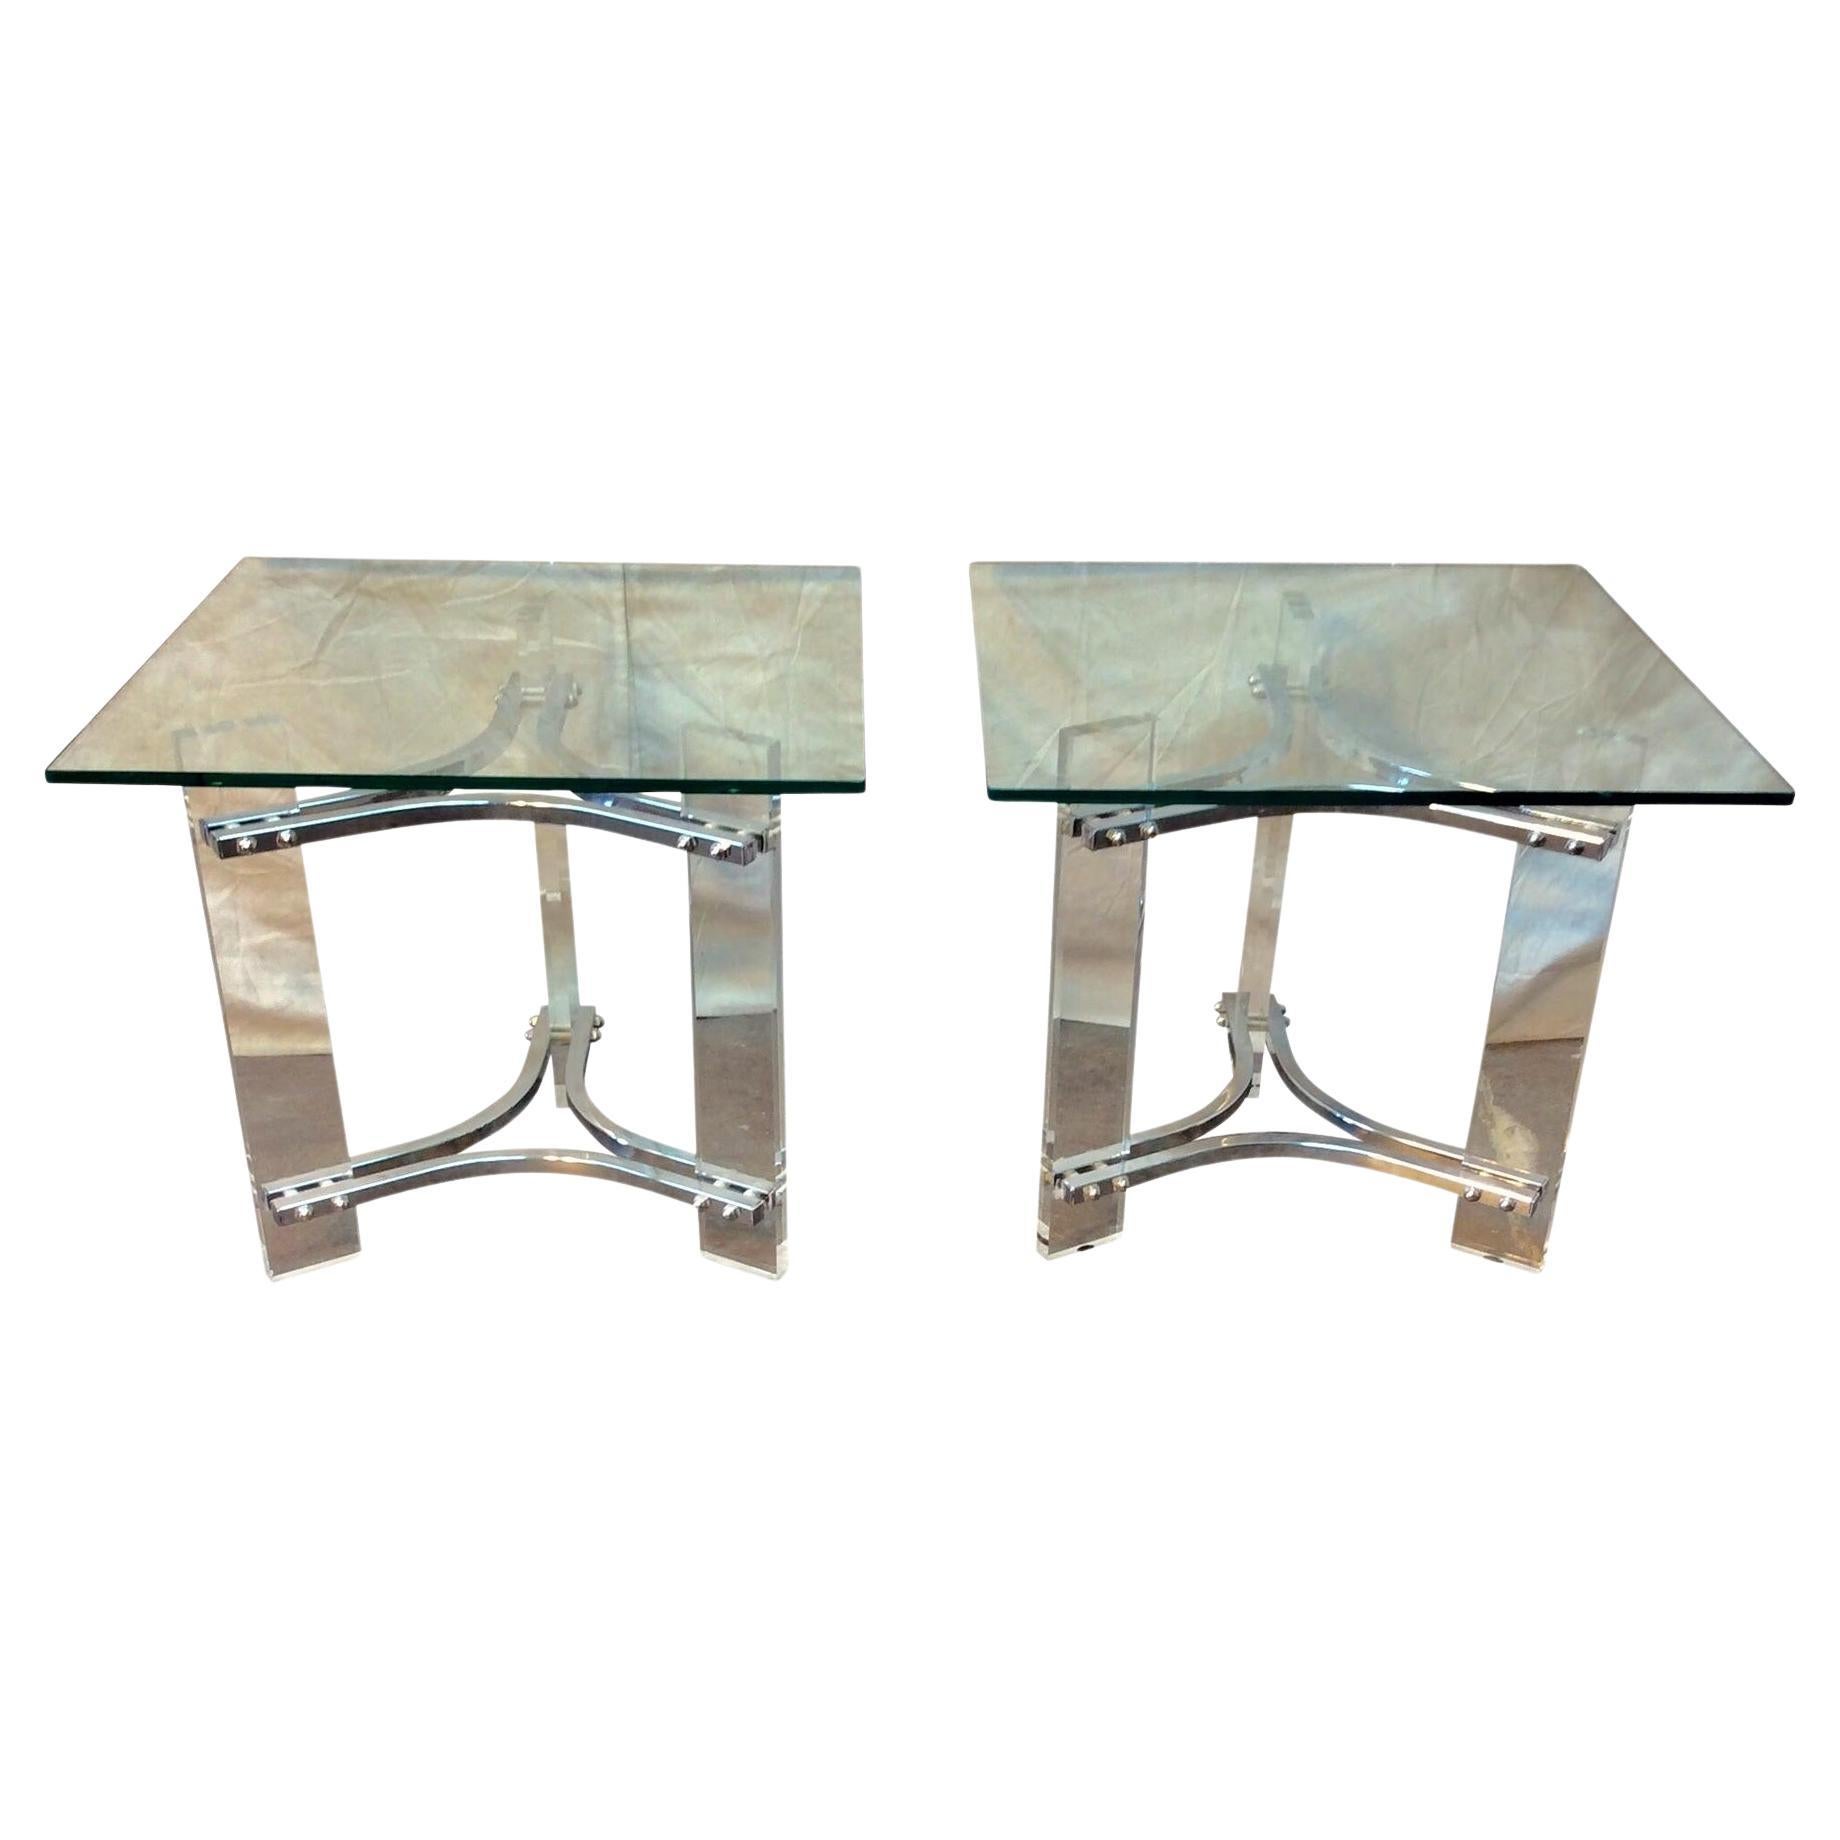  Mid-Century Modern Sculptural Lucite Chrome and Glass Side Tables - a Pair